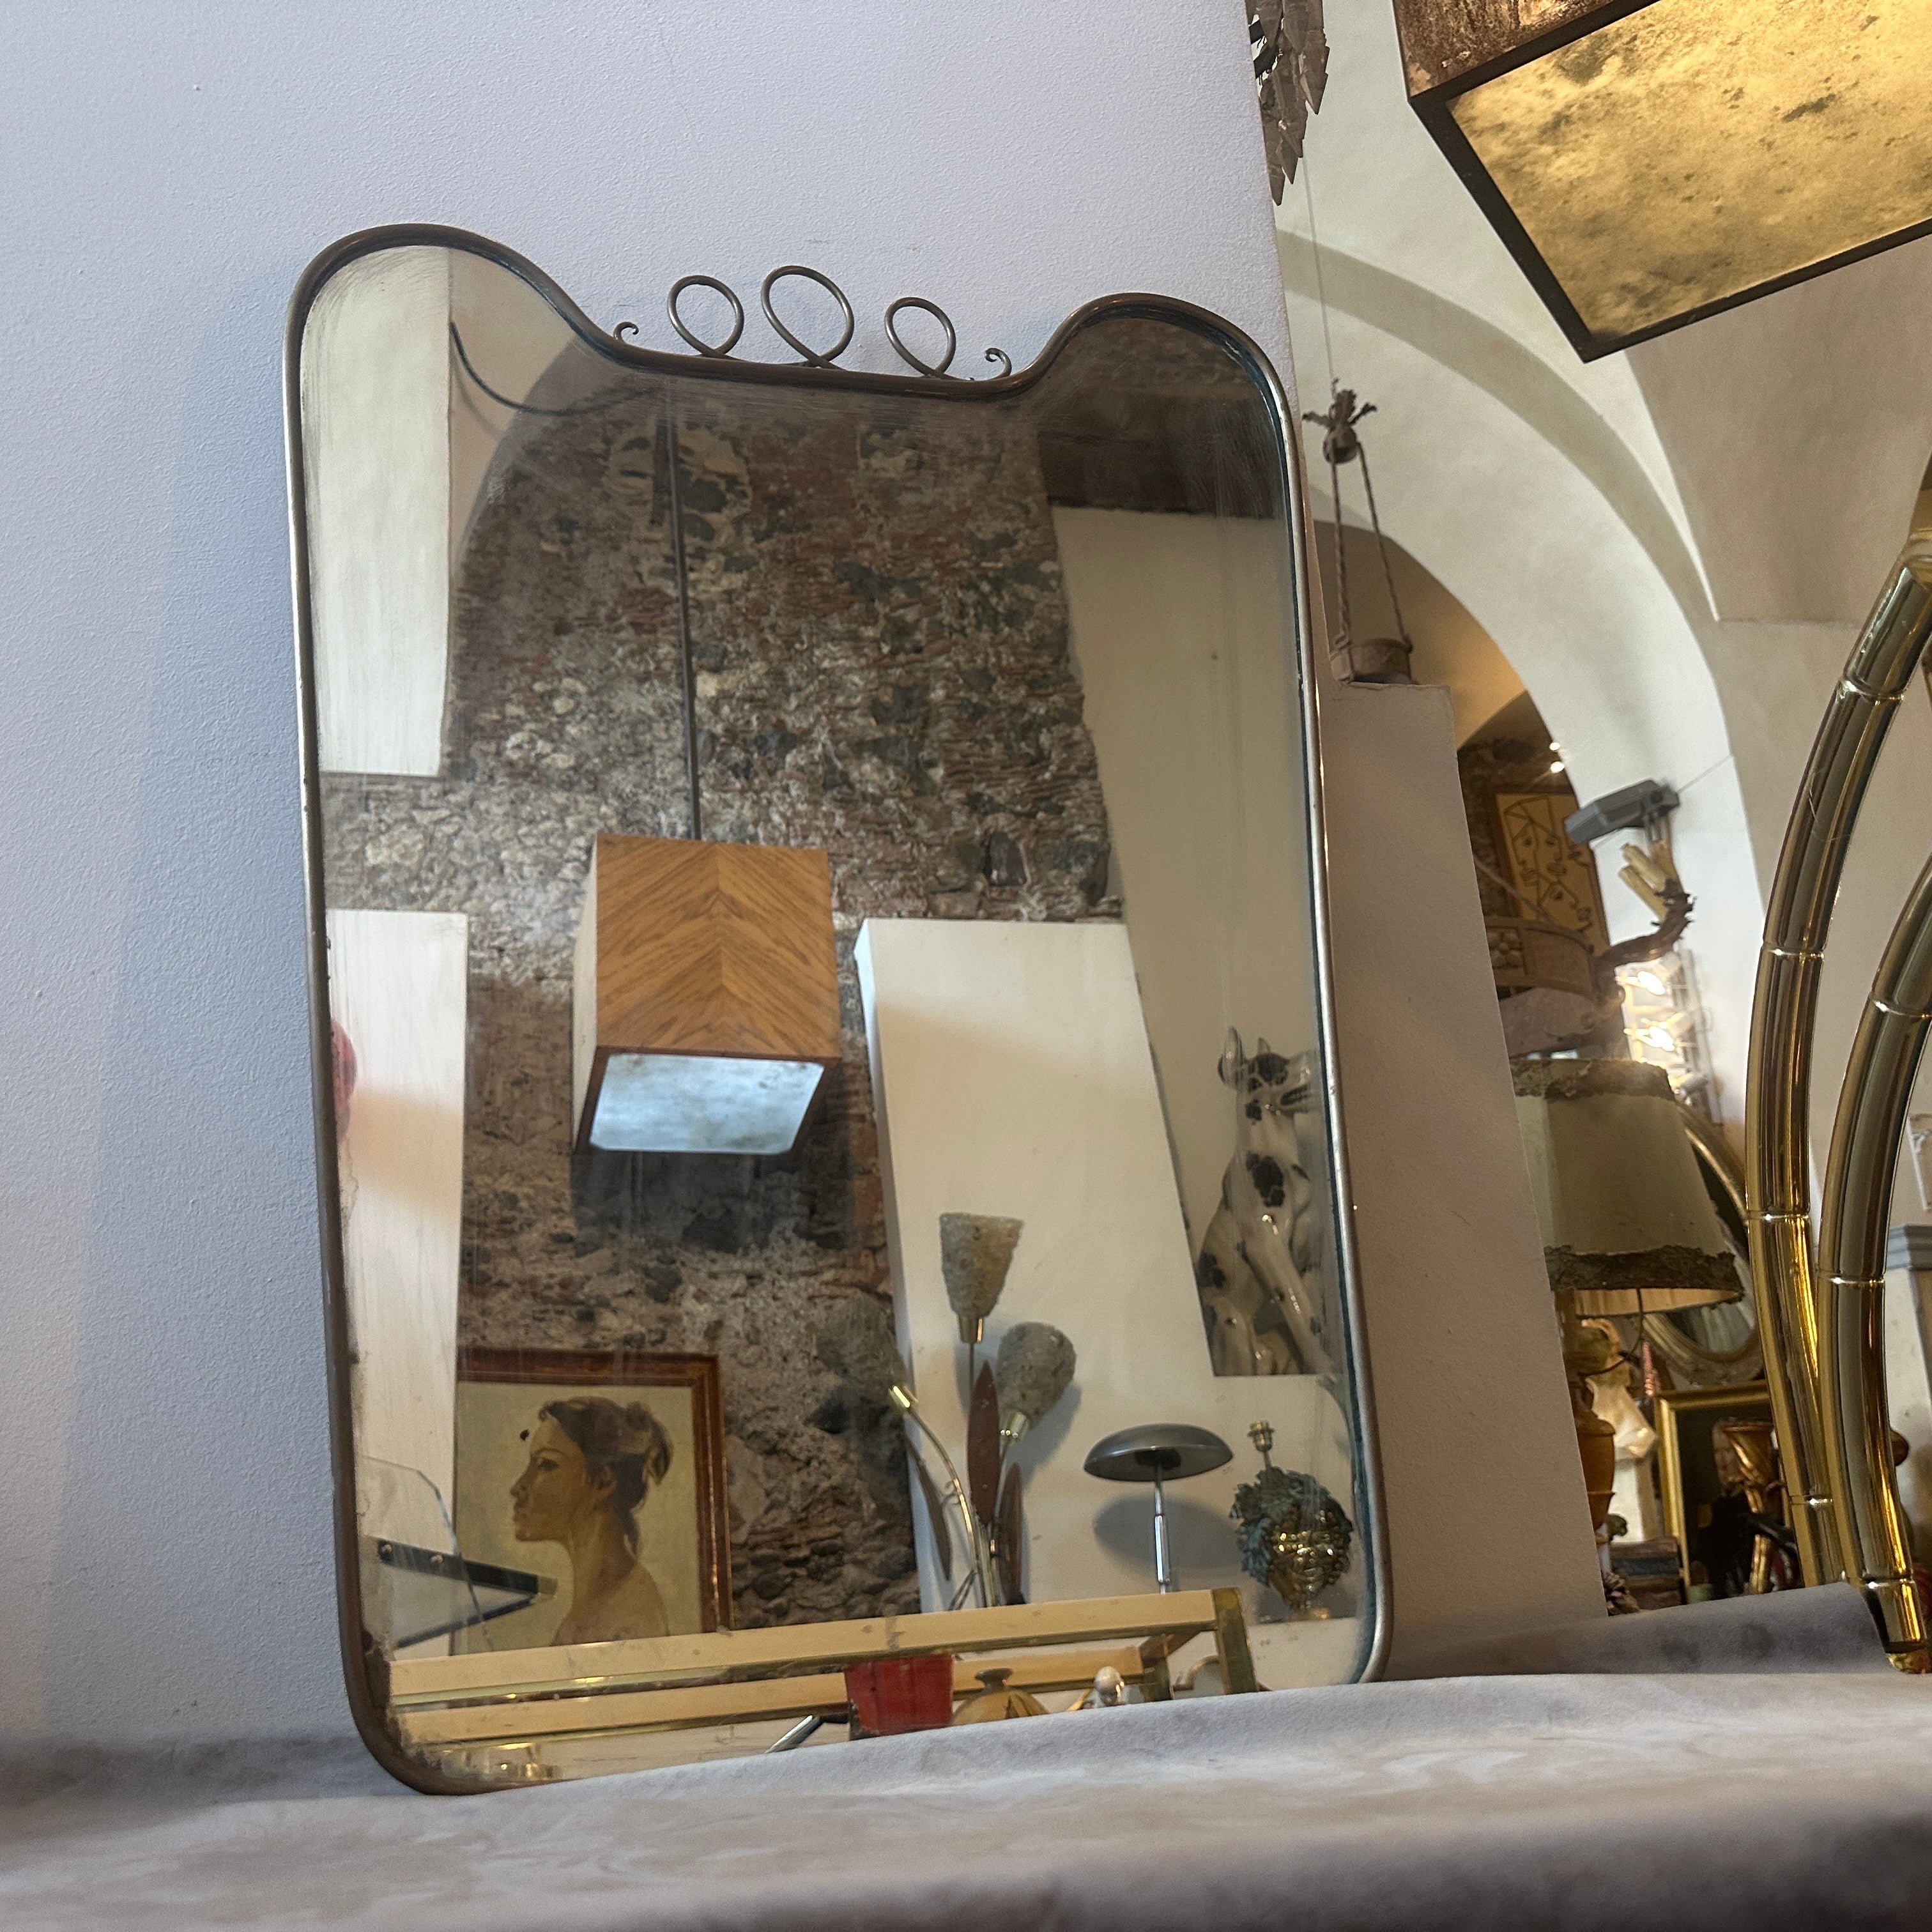 An amazing mid-century modern biscuit shaped solid brass wall mirror hand-crafted in Italy in the Fifties in the manner of Gio Ponti which he used these wall mirrors to furnish the most prestigious homes in Milan in the 1950s. The mirror it's in